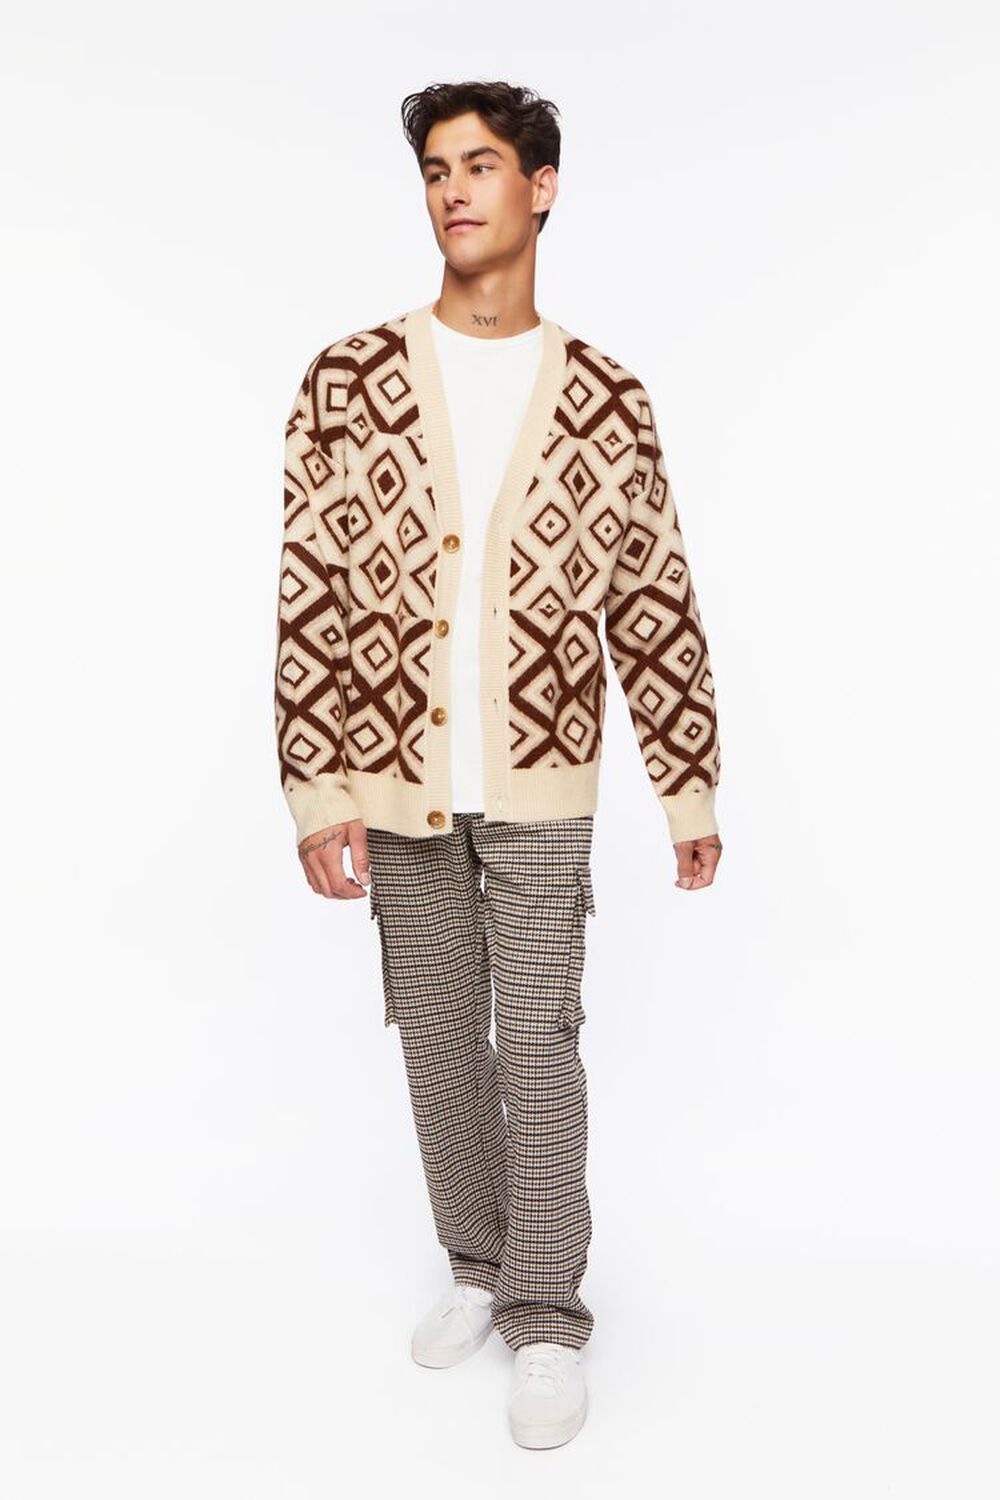 BROWN/MULTI Houndstooth Straight-Leg Trousers, image 1